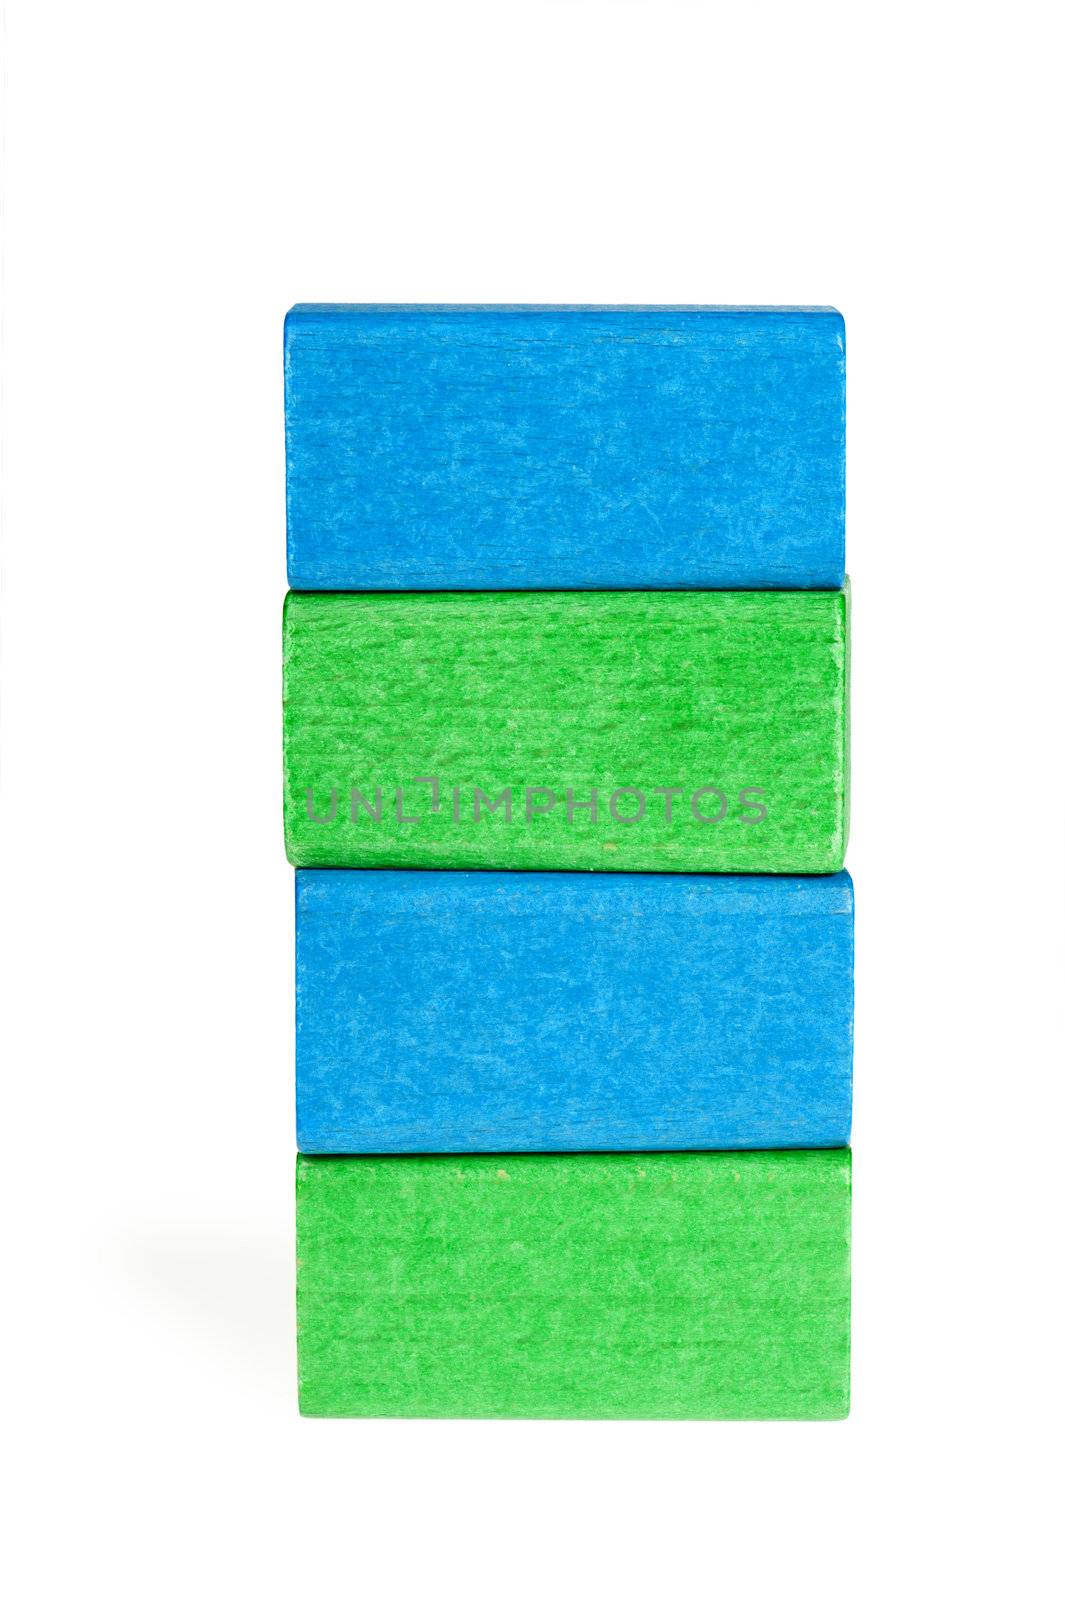 Colour wooden cubes. It is isolated on a white background